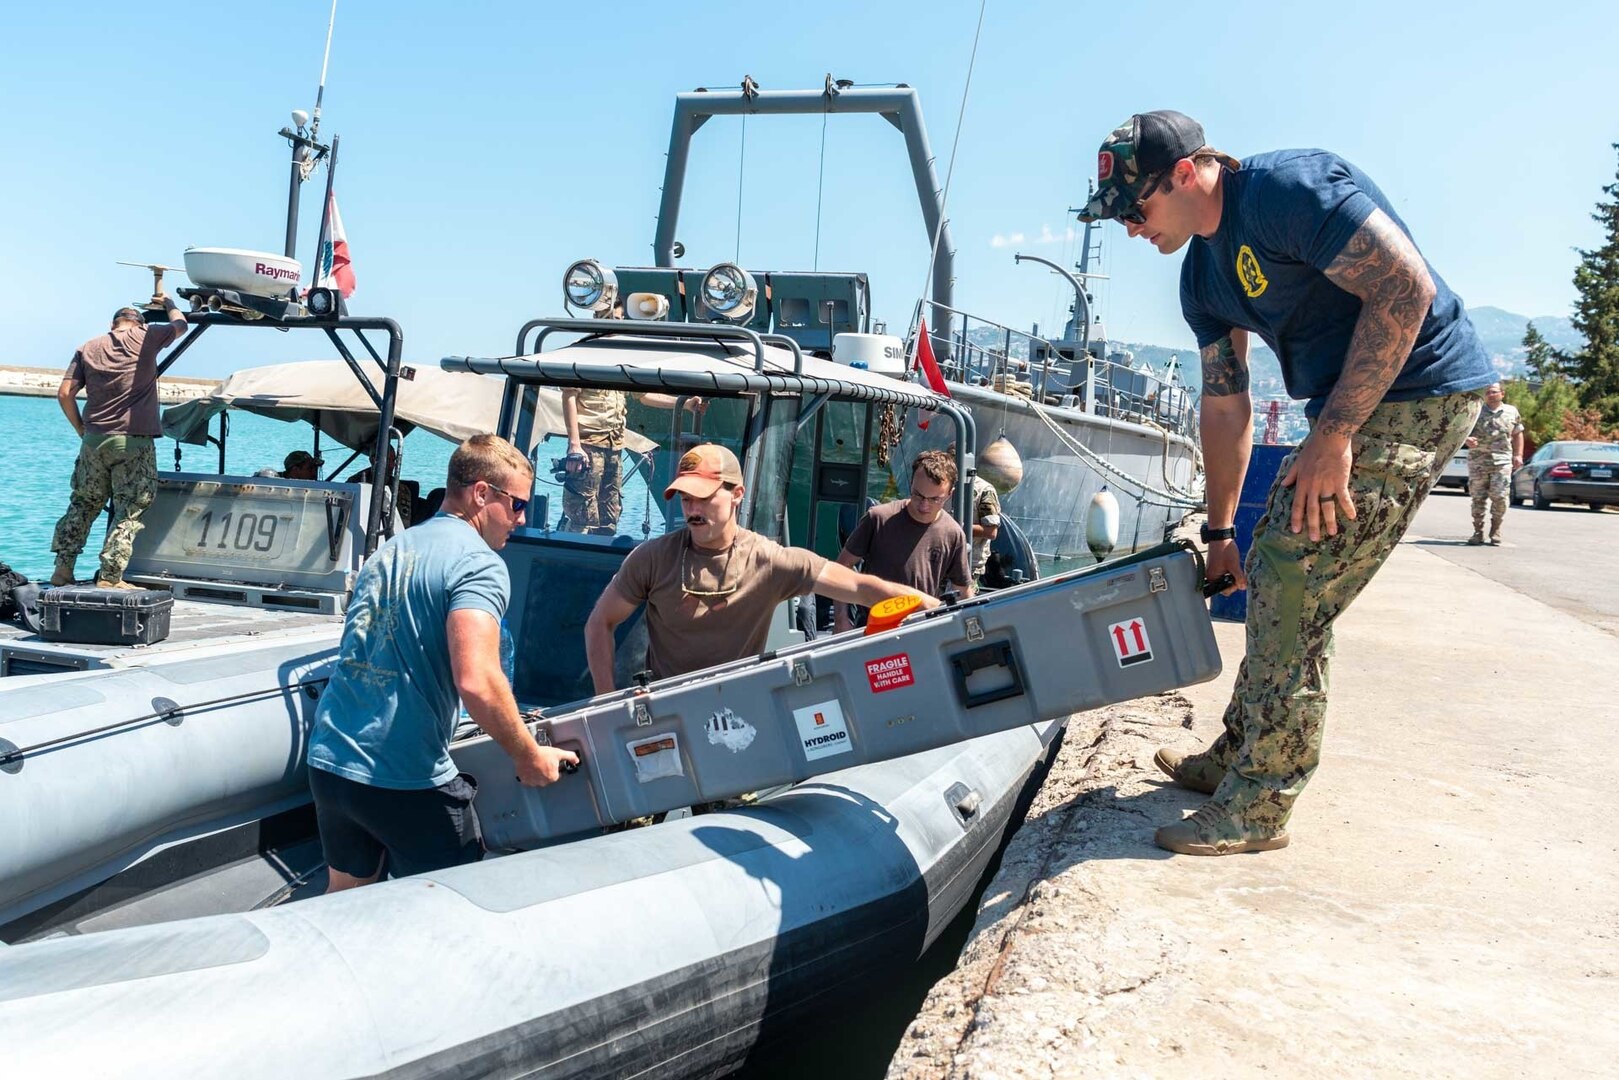 210524-N-KC128-0003 HANNOUSH, Lebanon (May 24, 2021) – Sailors assigned to Commander, Task Force 52 load an unmanned underwater vehicle aboard a rigid-hull inflatable boat during a mine-searching demonstration with members of the Lebanese Armed Forces as part of exercise Resolute Union 21 in Hannoush, Lebanon, May 24. Resolute Union 21 is an annual, bilateral explosive ordnance disposal and maritime security exercise between U.S. 5th Fleet and Lebanese Armed Forces to enhance mutual capabilities and interoperability. (U.S. Navy photo by Mass Communication Specialist 1st Class Daniel Hinton)